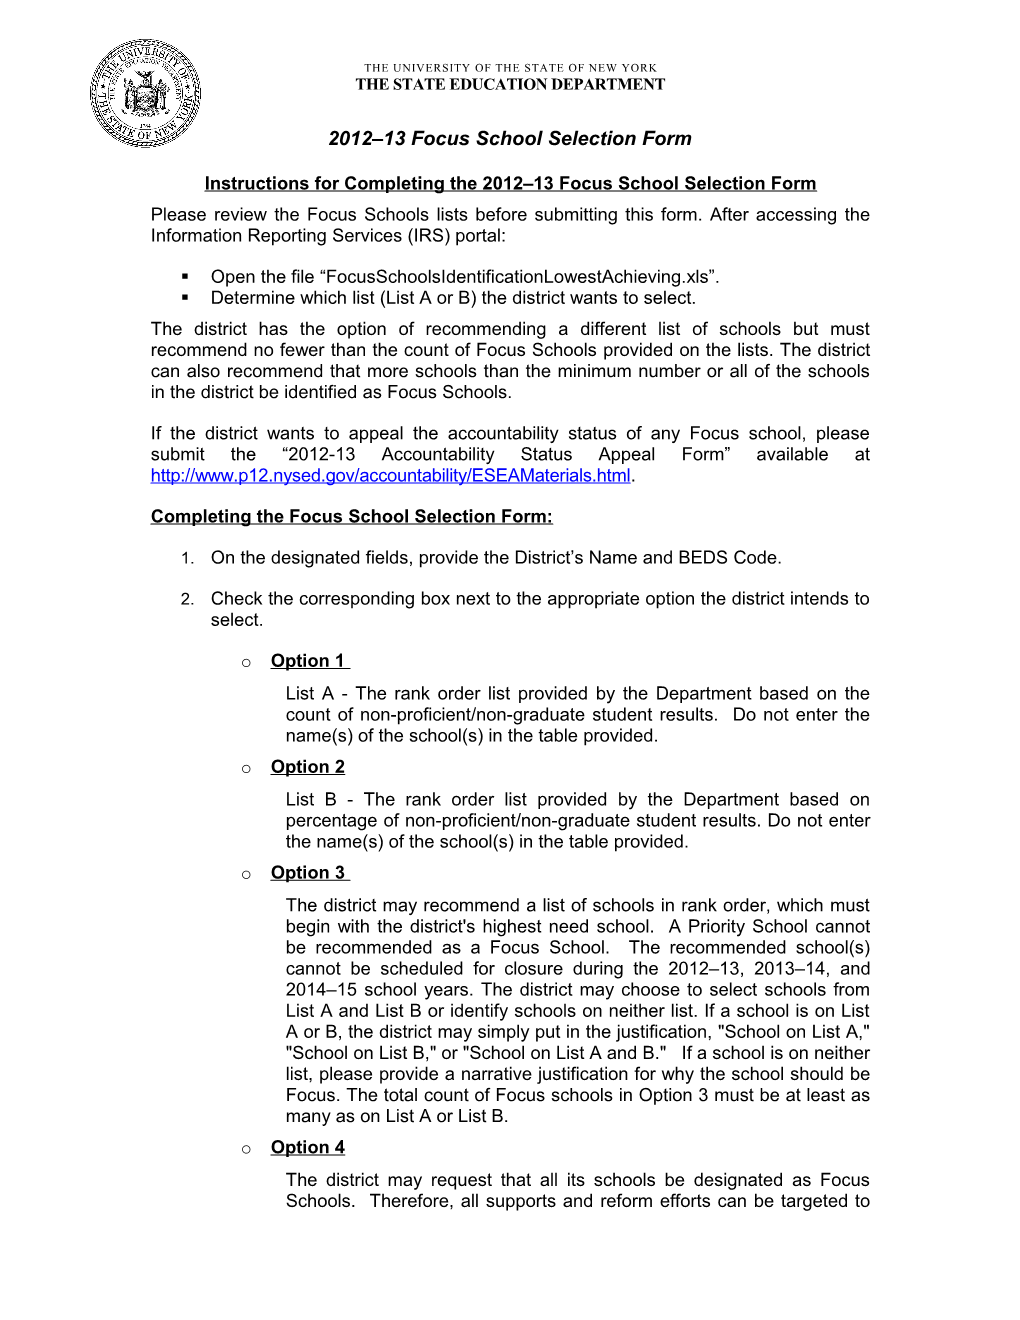 Instructions for Completing the 2012 13 Focus School Selection Form